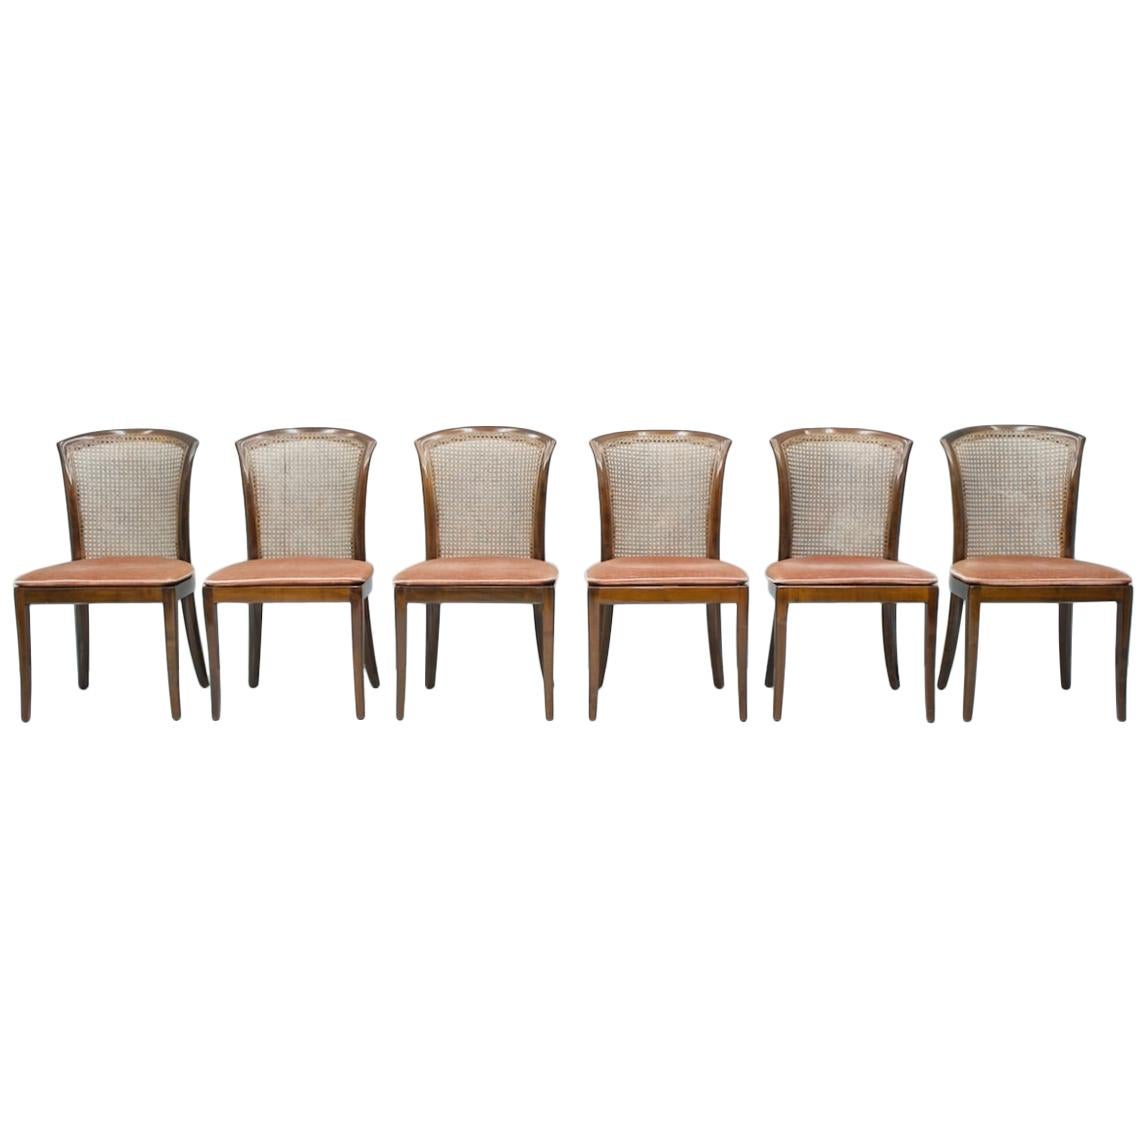 Set of 6 Elegant Chairs in Mahogany and Cane WK, Germany, 1970s